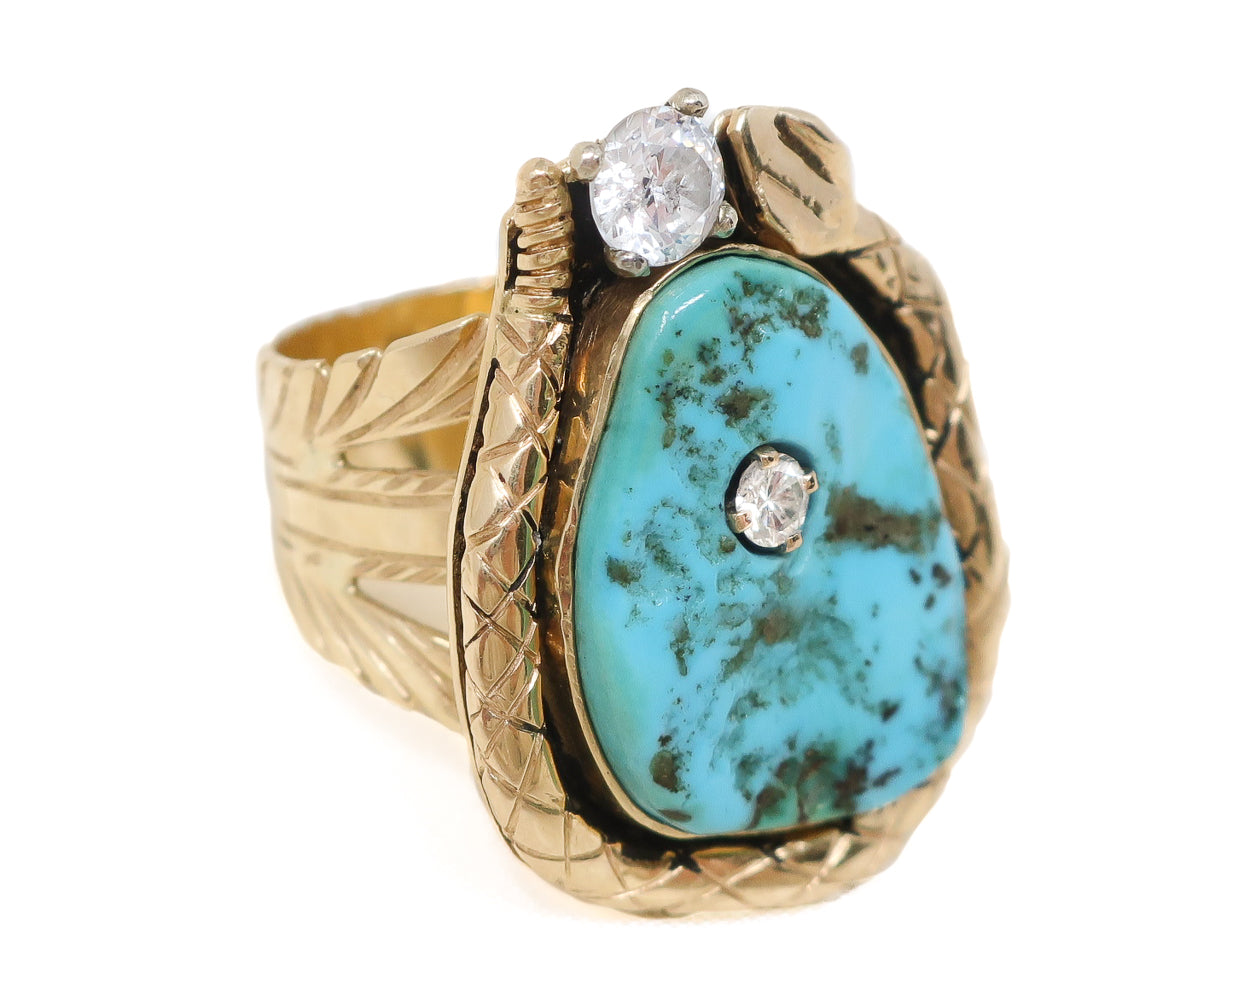 Late-Midcentury Turquoise Ring with Diamonds